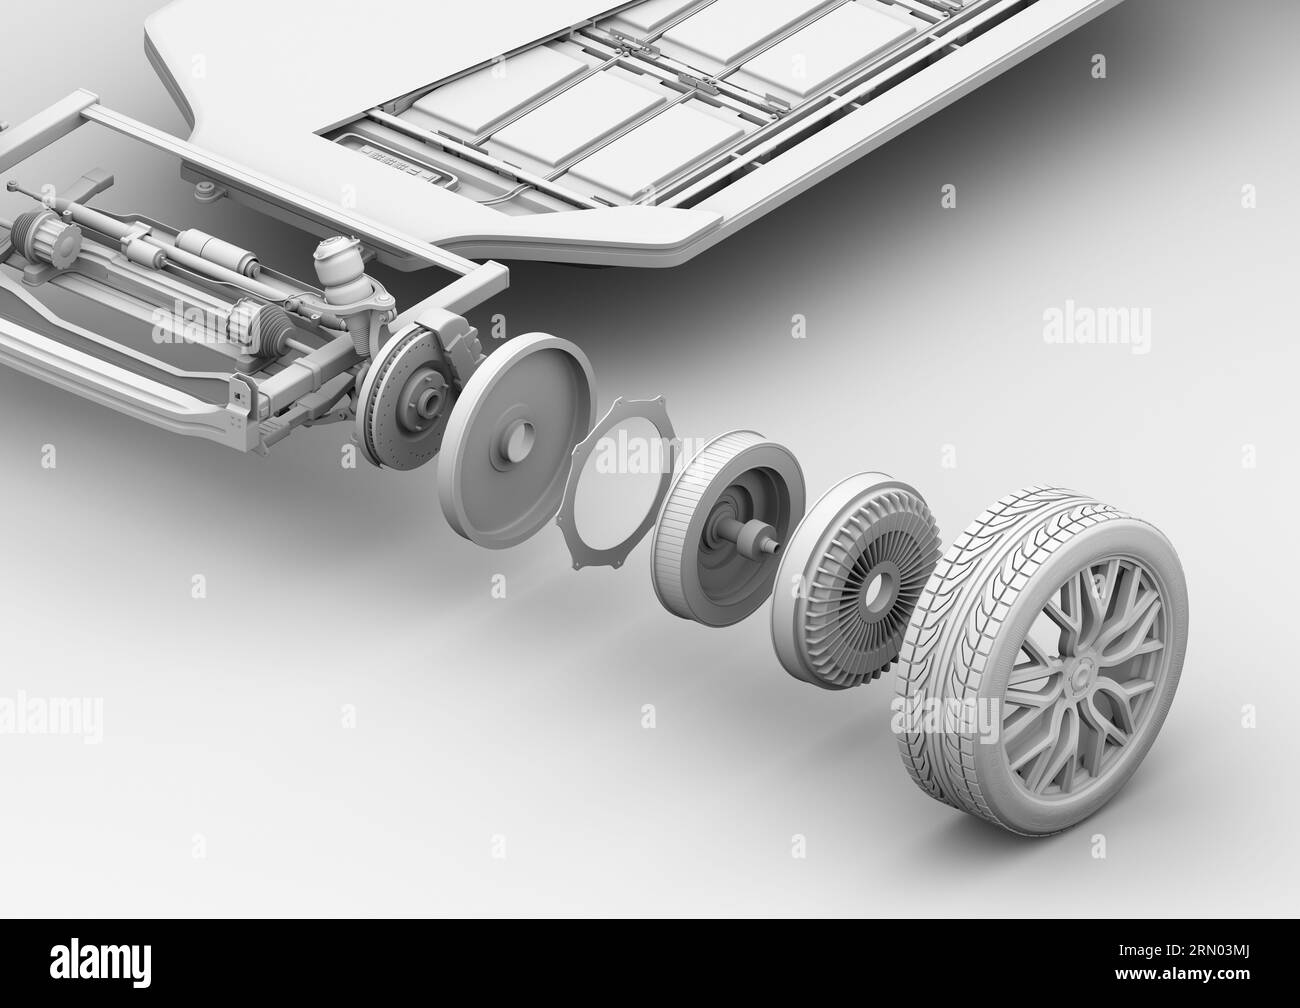 Isometric Exploded view of In-Wheel Motor. Clay rendering style. 3D rendering illustration. Stock Photo